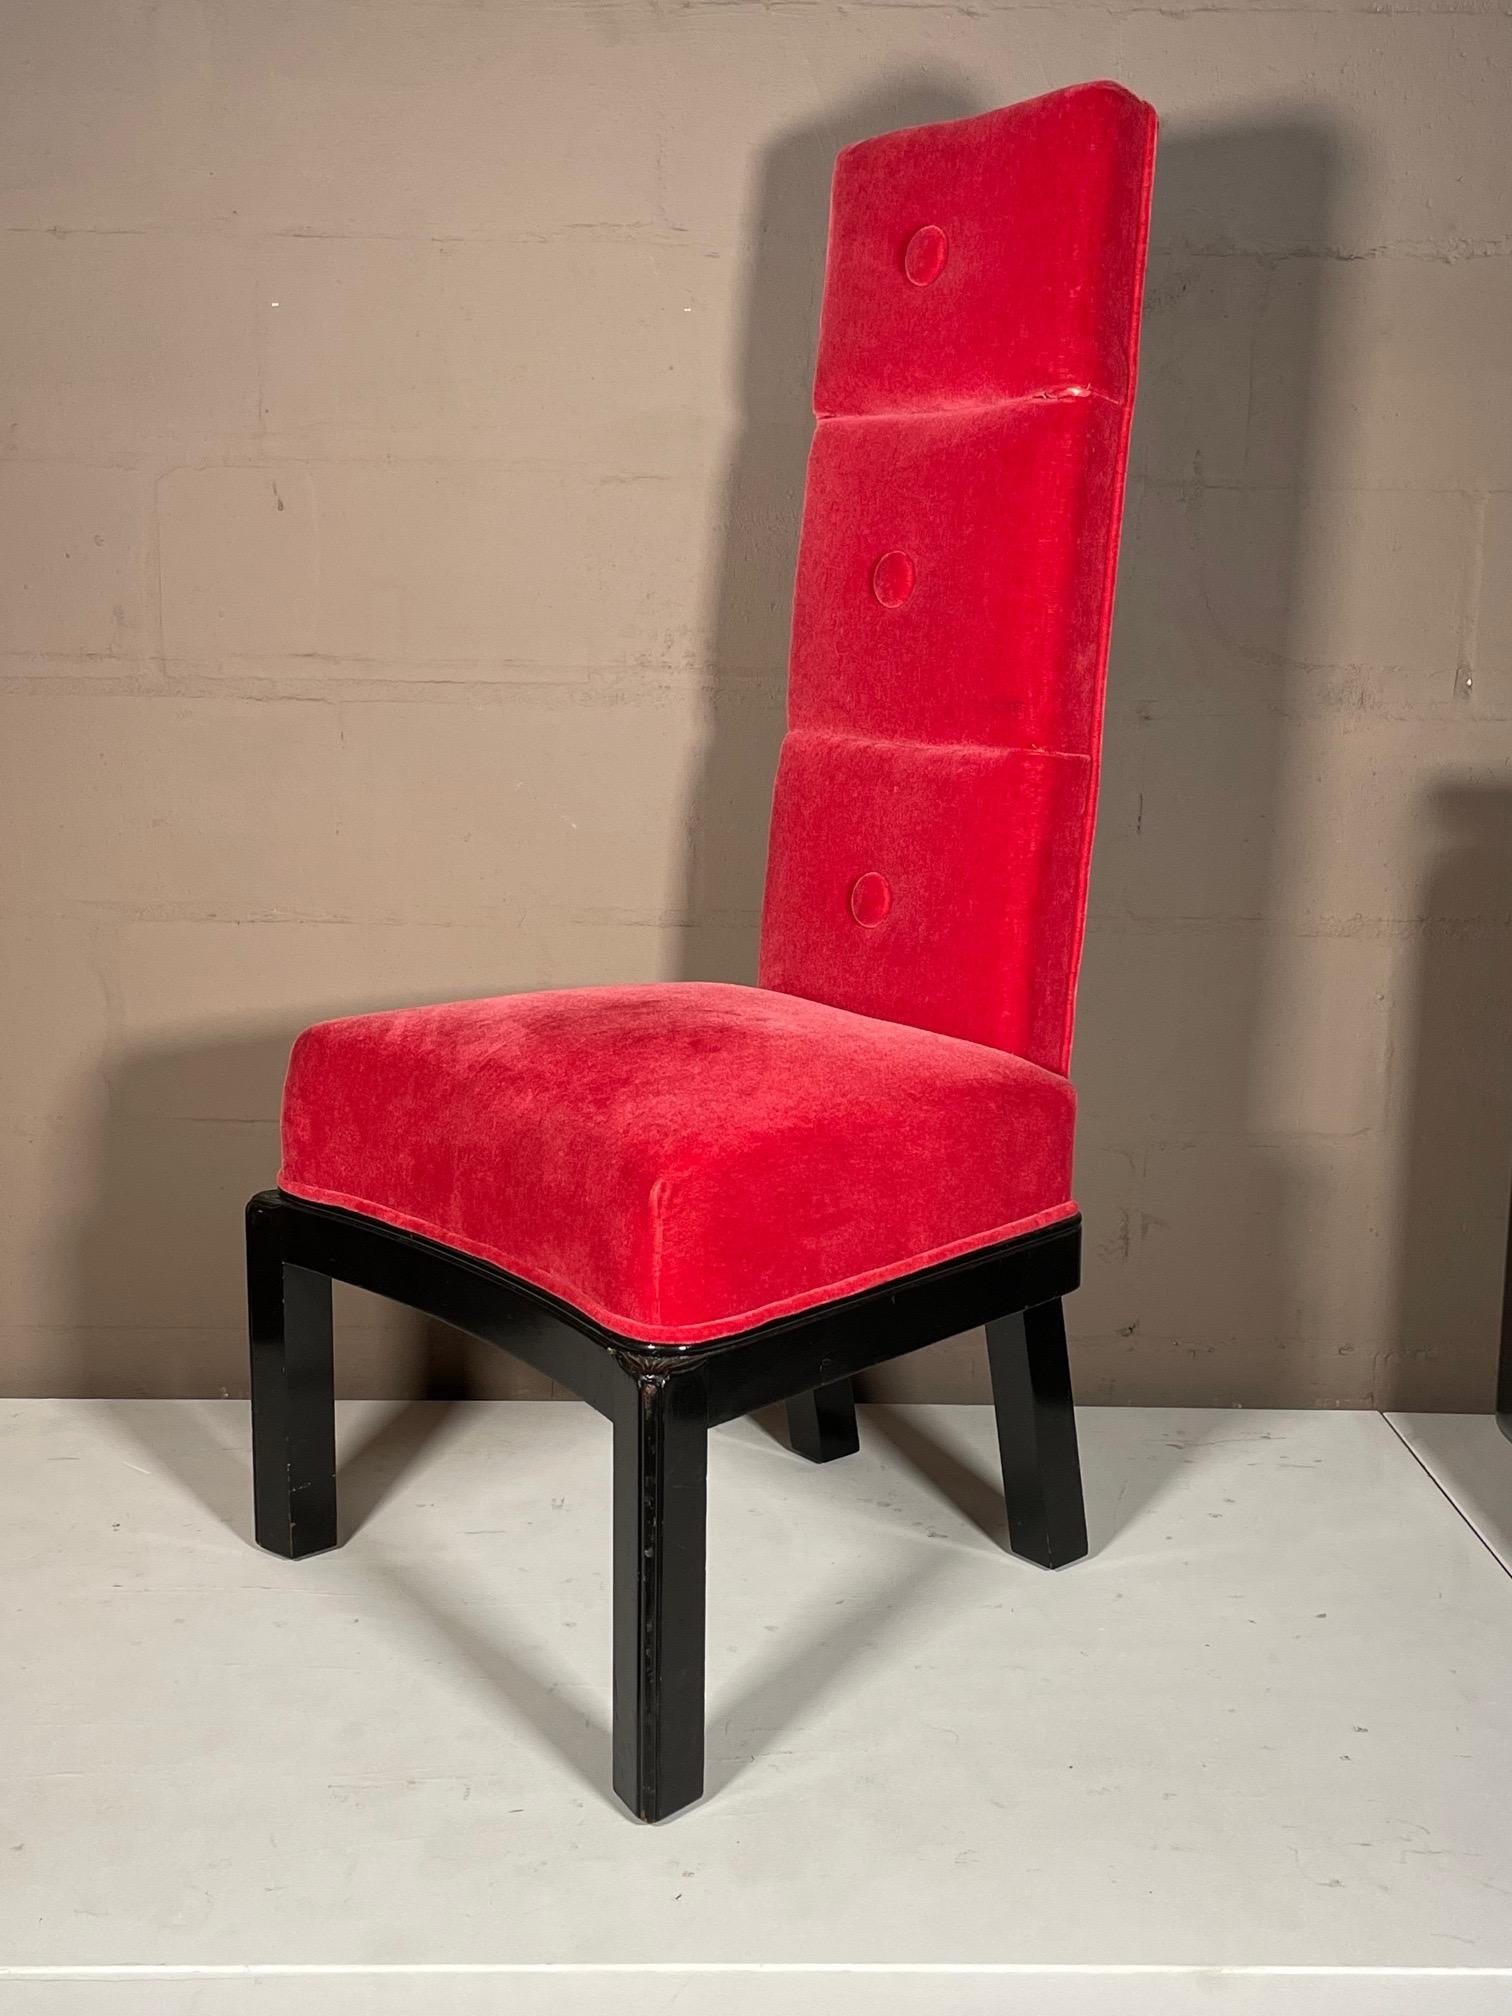 A classic James Mont tall back chair, ca' 1950's. Lacquered frame with velvet upholstery.